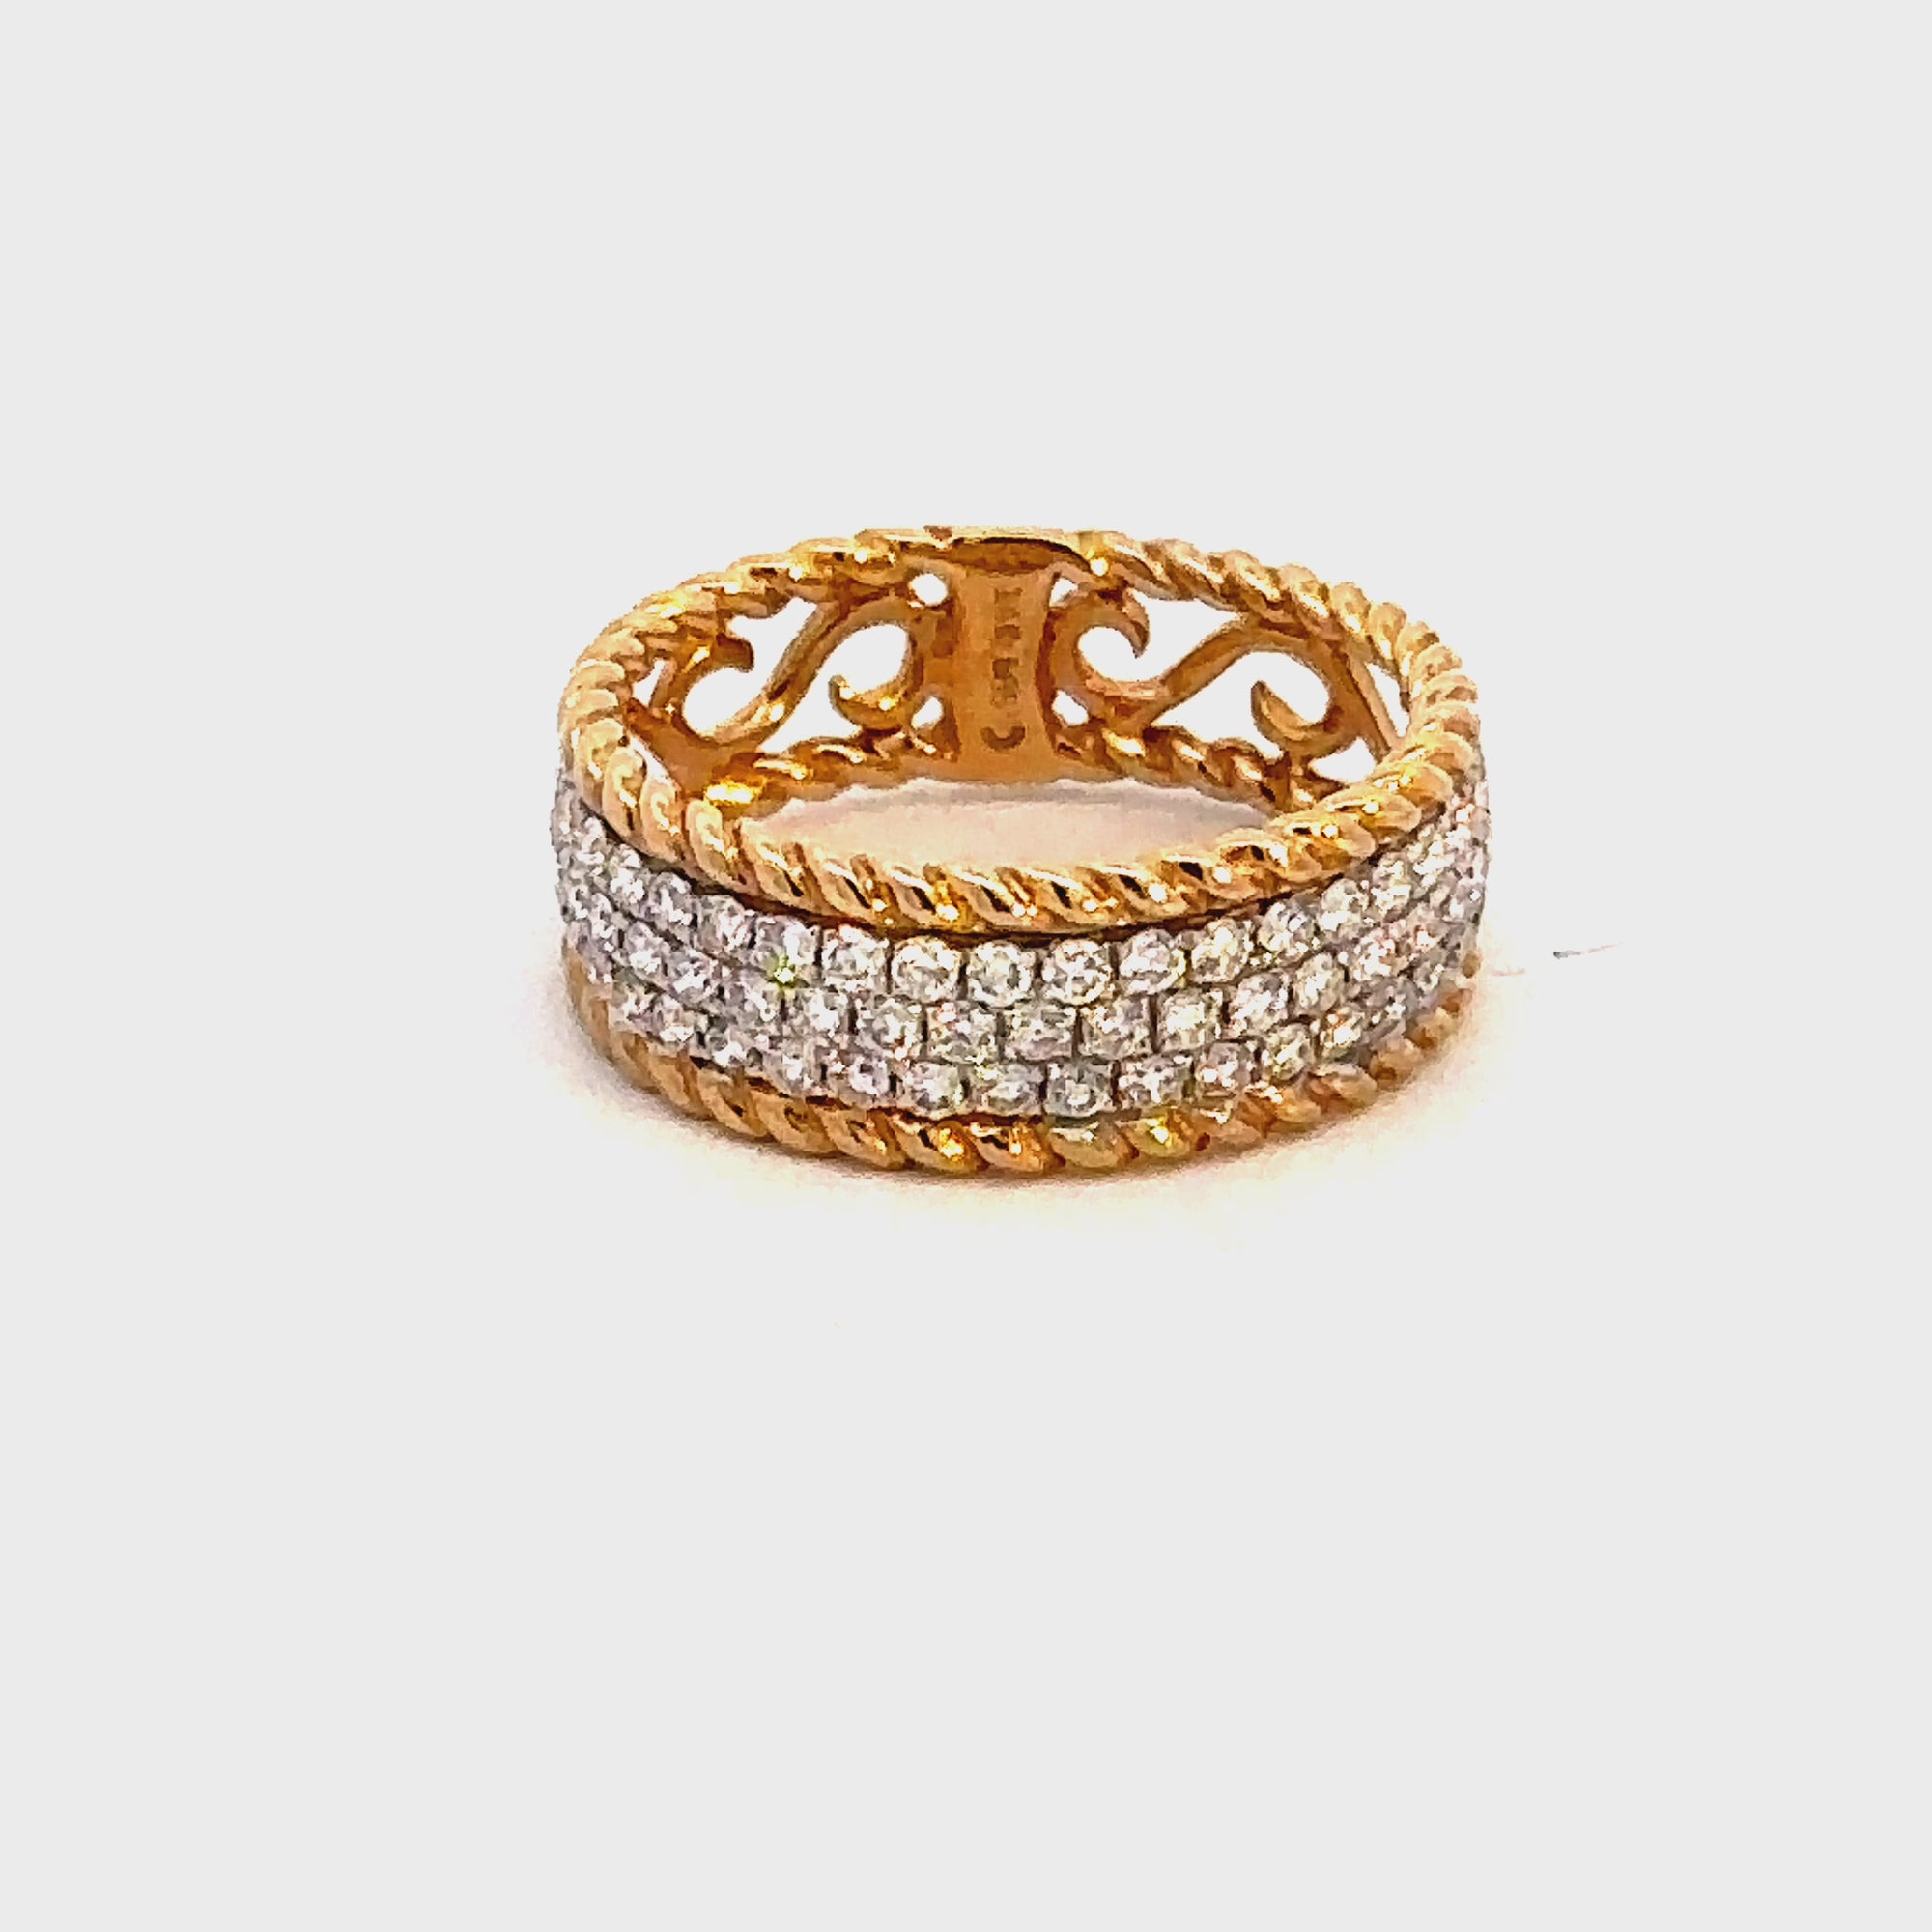 video of 14KT Yellow Gold Rope Edge Pave' Band with .75TW Diamonds Highlighted with Rhodium.   Stock Size 6.5.